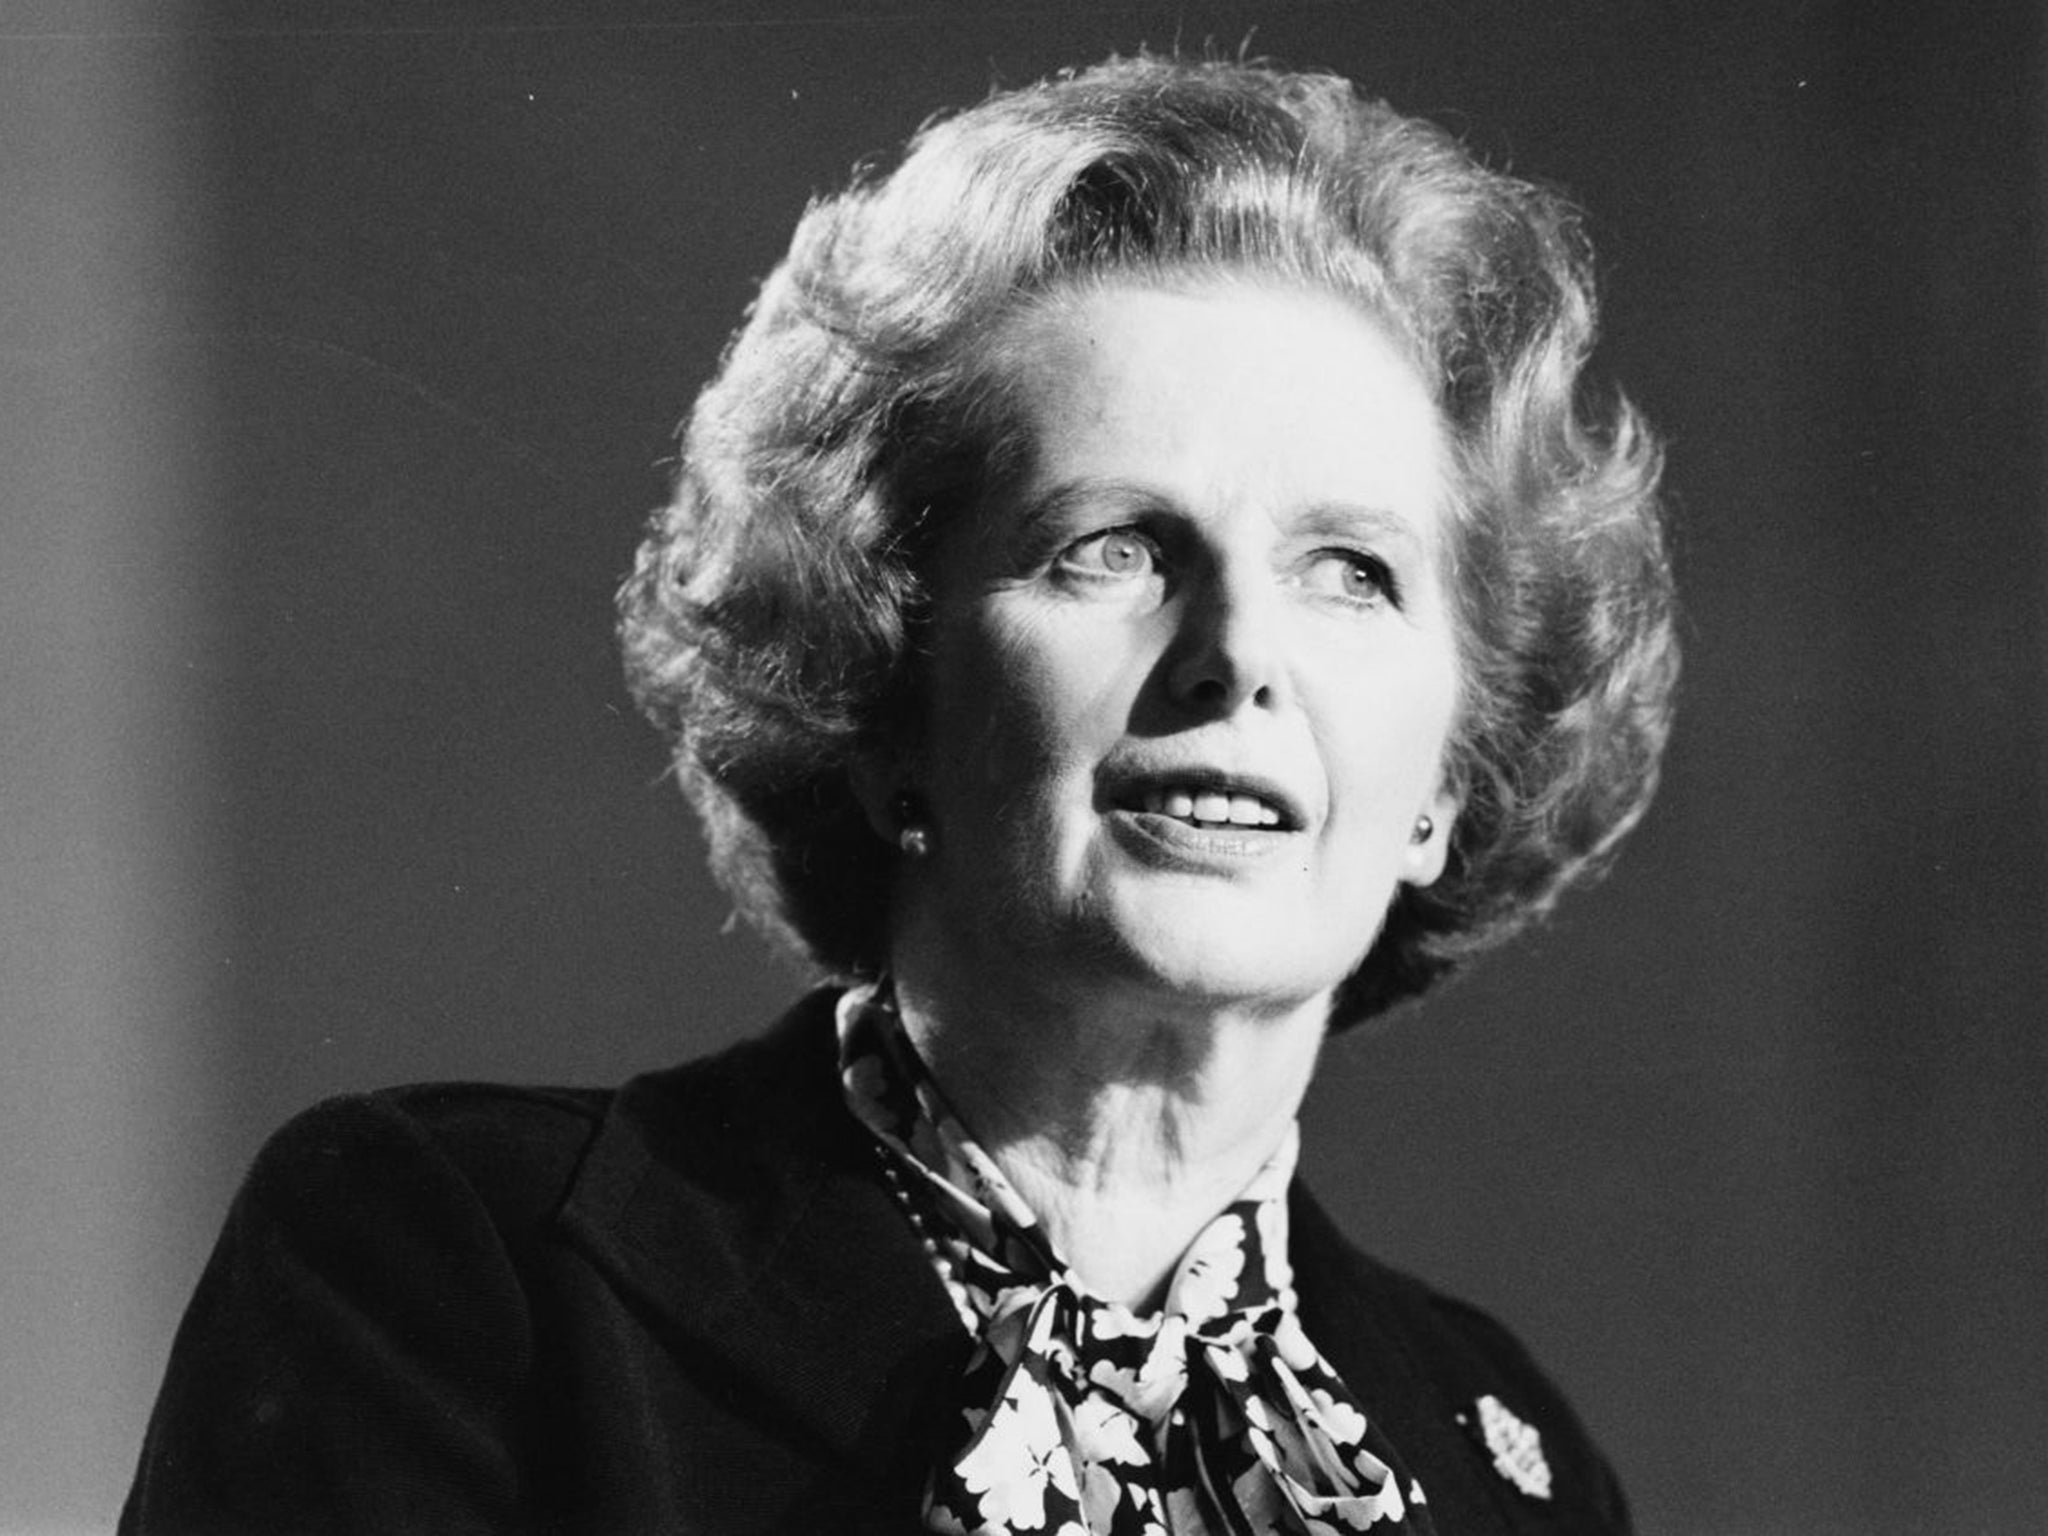 Former prime minister Margaret Thatcher changed the tenor of political debate over the European Union